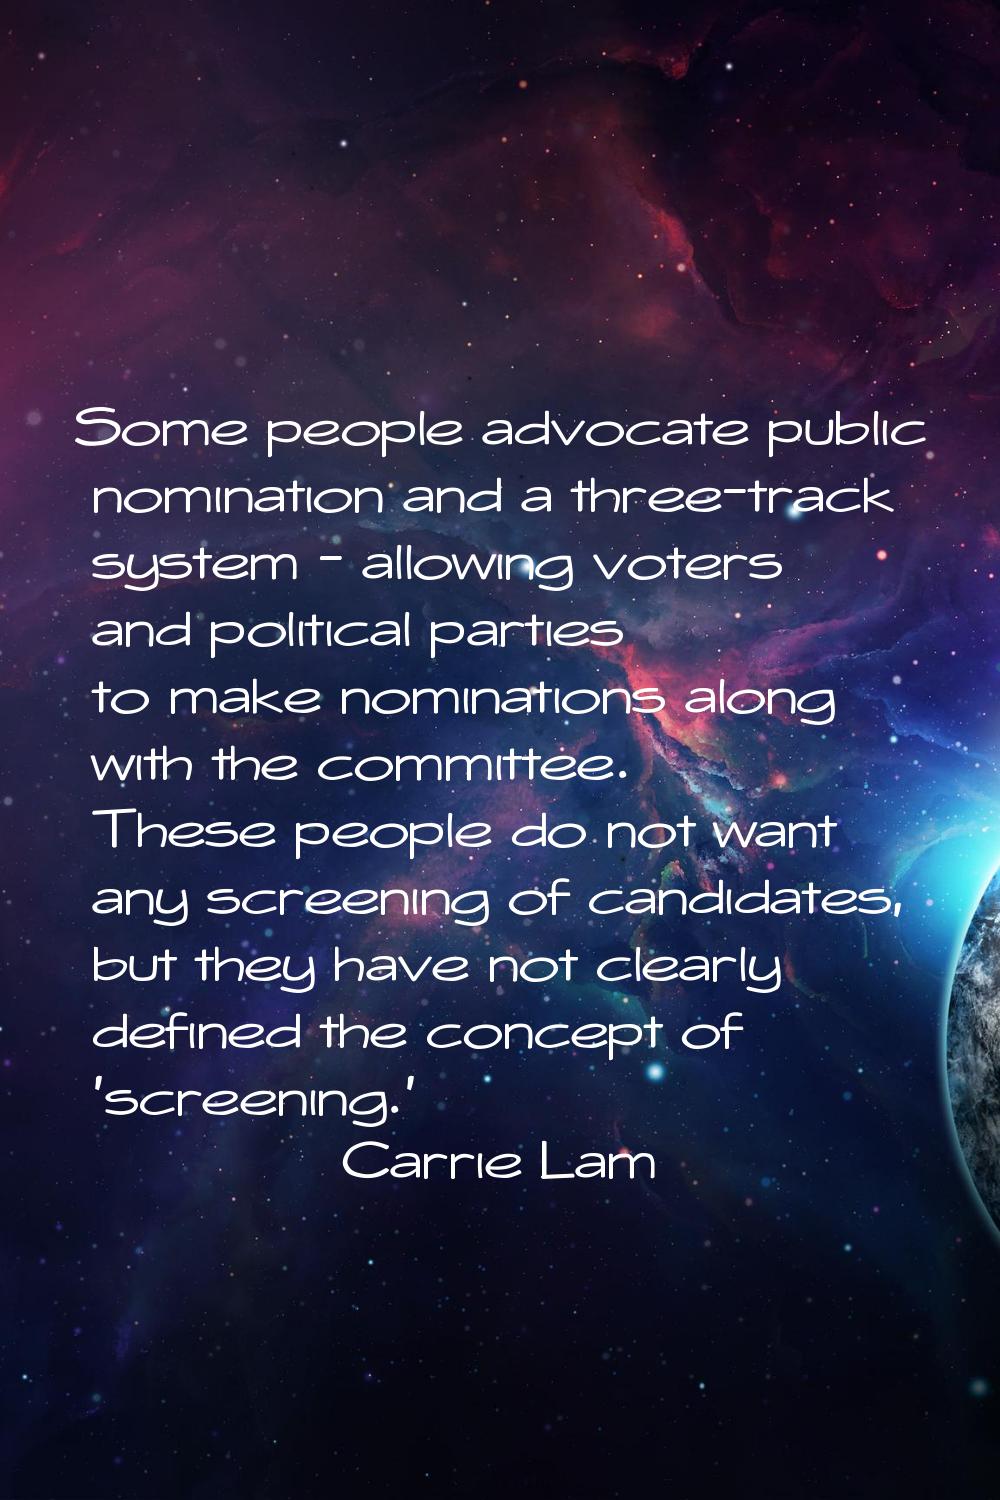 Some people advocate public nomination and a three-track system - allowing voters and political par